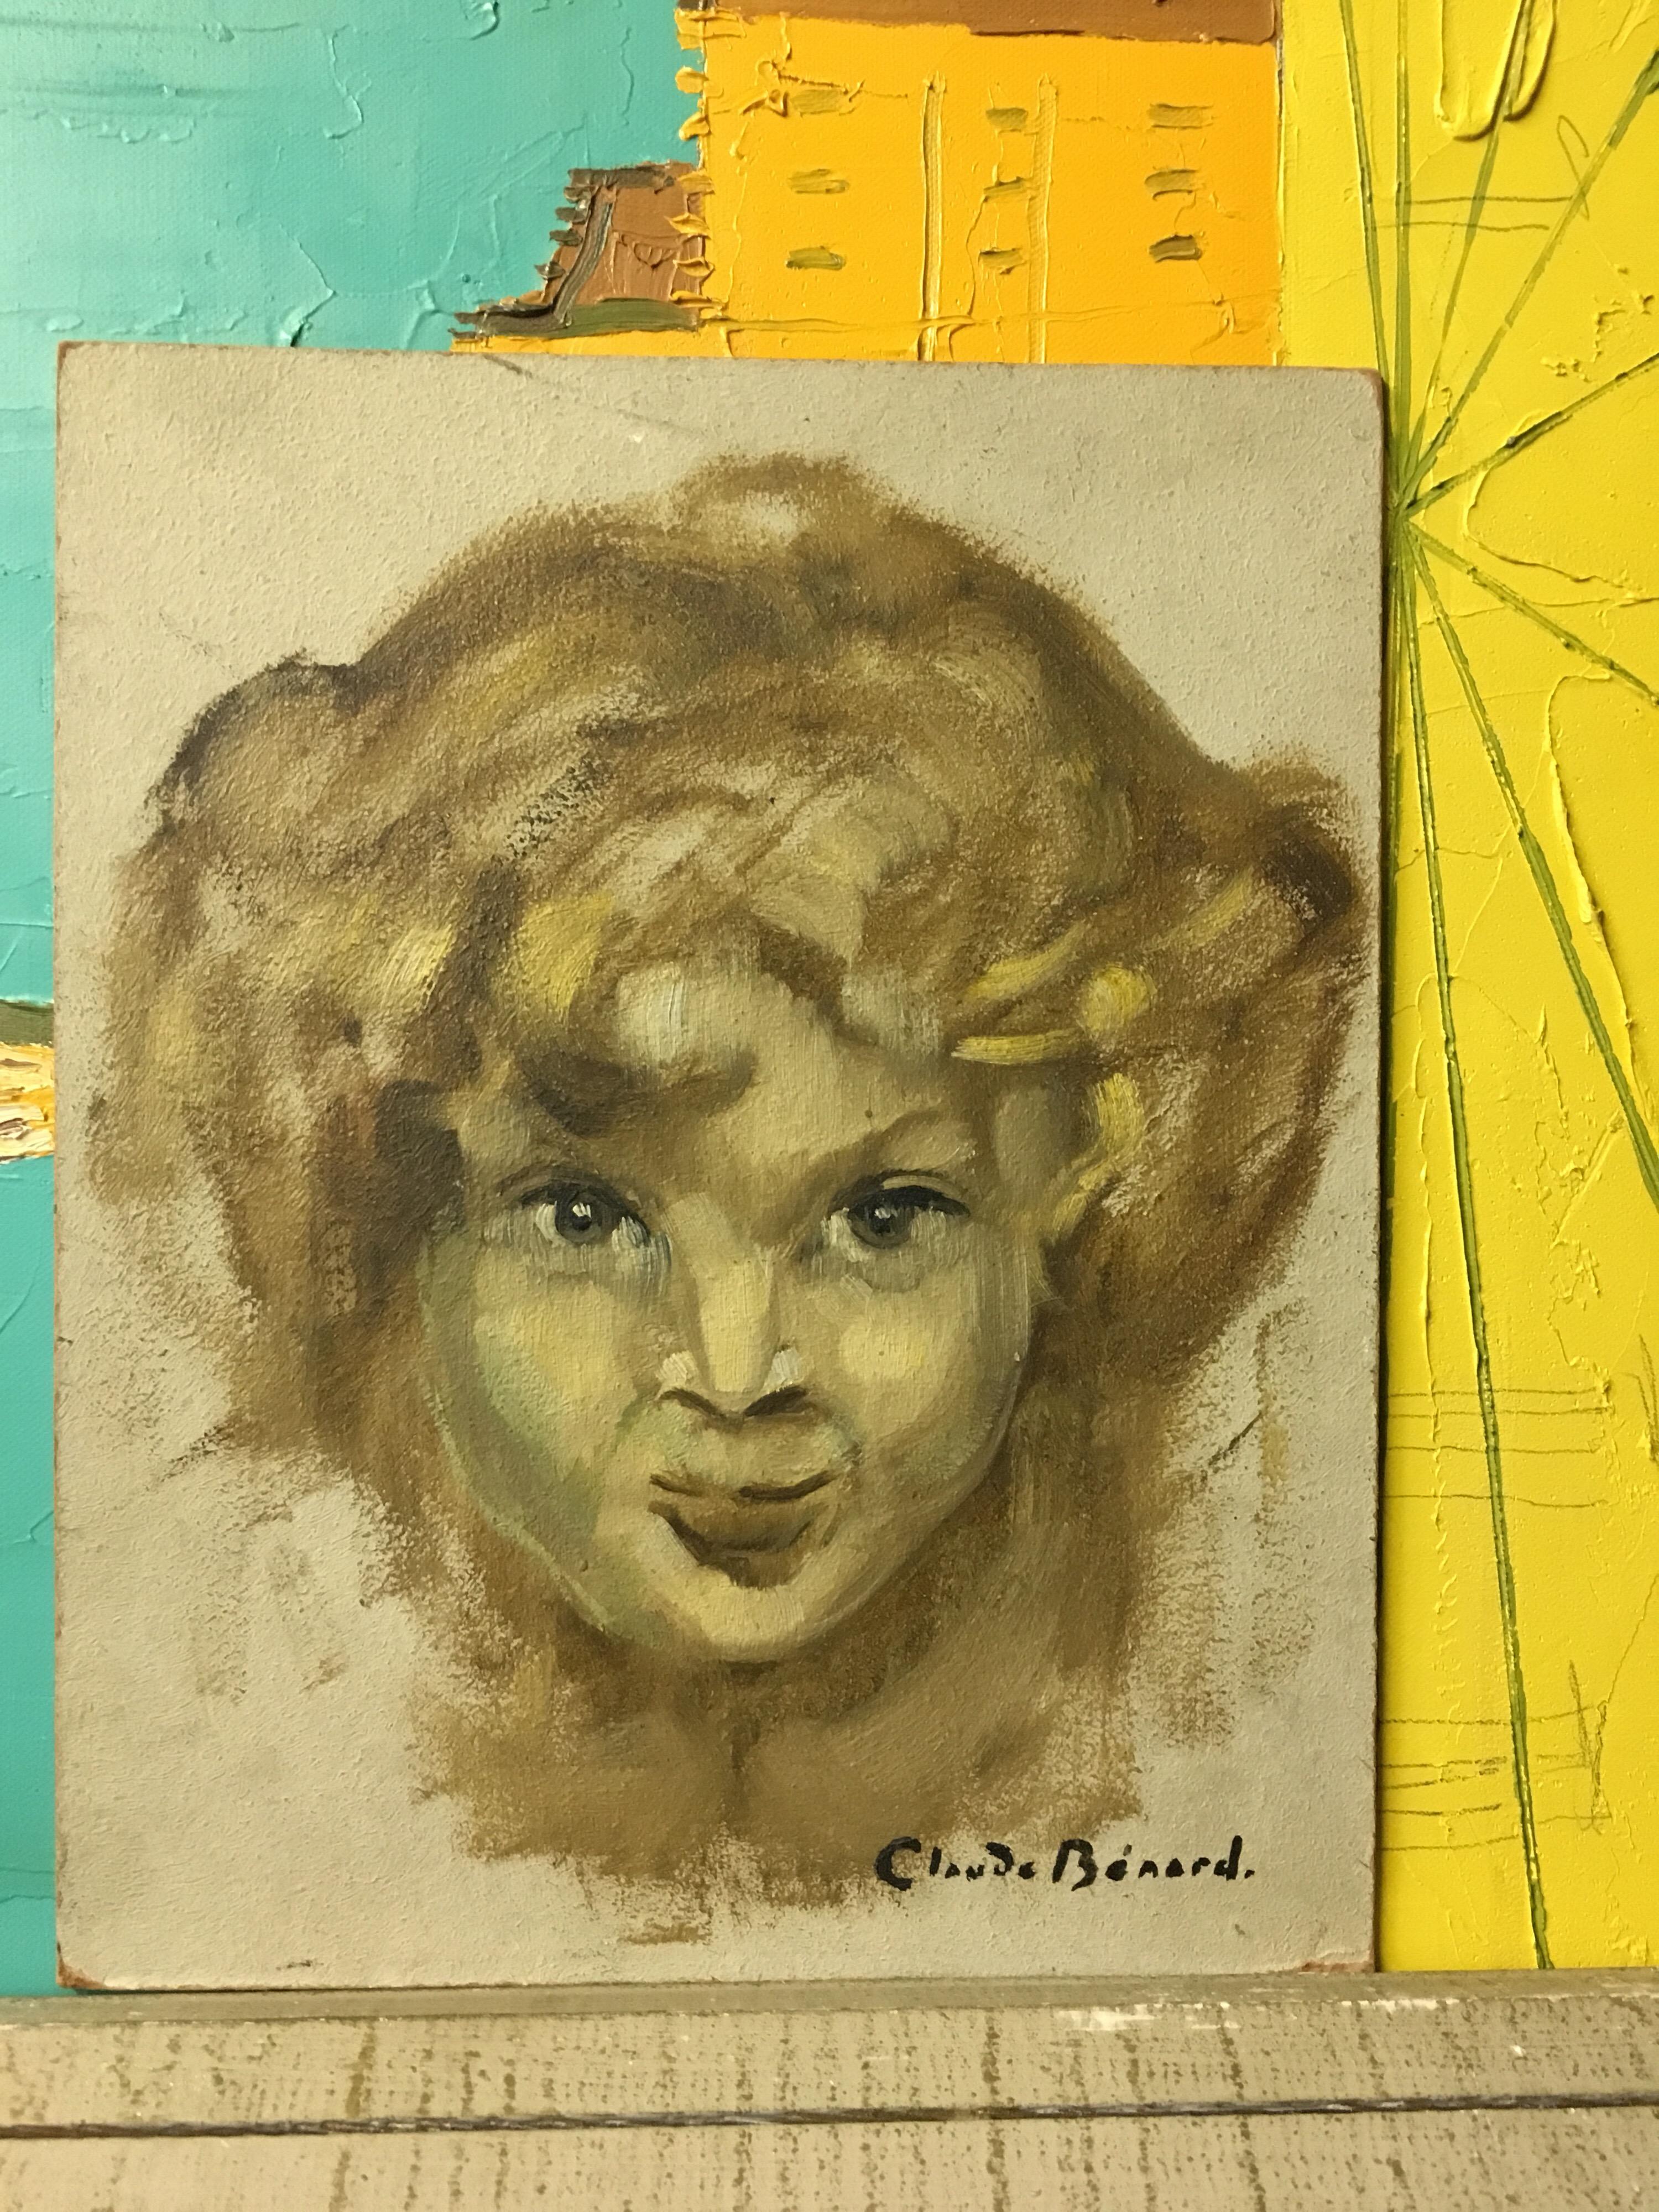 Mischievous Child, Impressionist Portrait, Signed Oil Painting
By French artist Claude Benard, (1926 - 2016)
Signed by the artist on the lower right hand corner
Oil painting on board, unframed
Board size: 10.75 x 8.75 inches

A brilliant portrayal